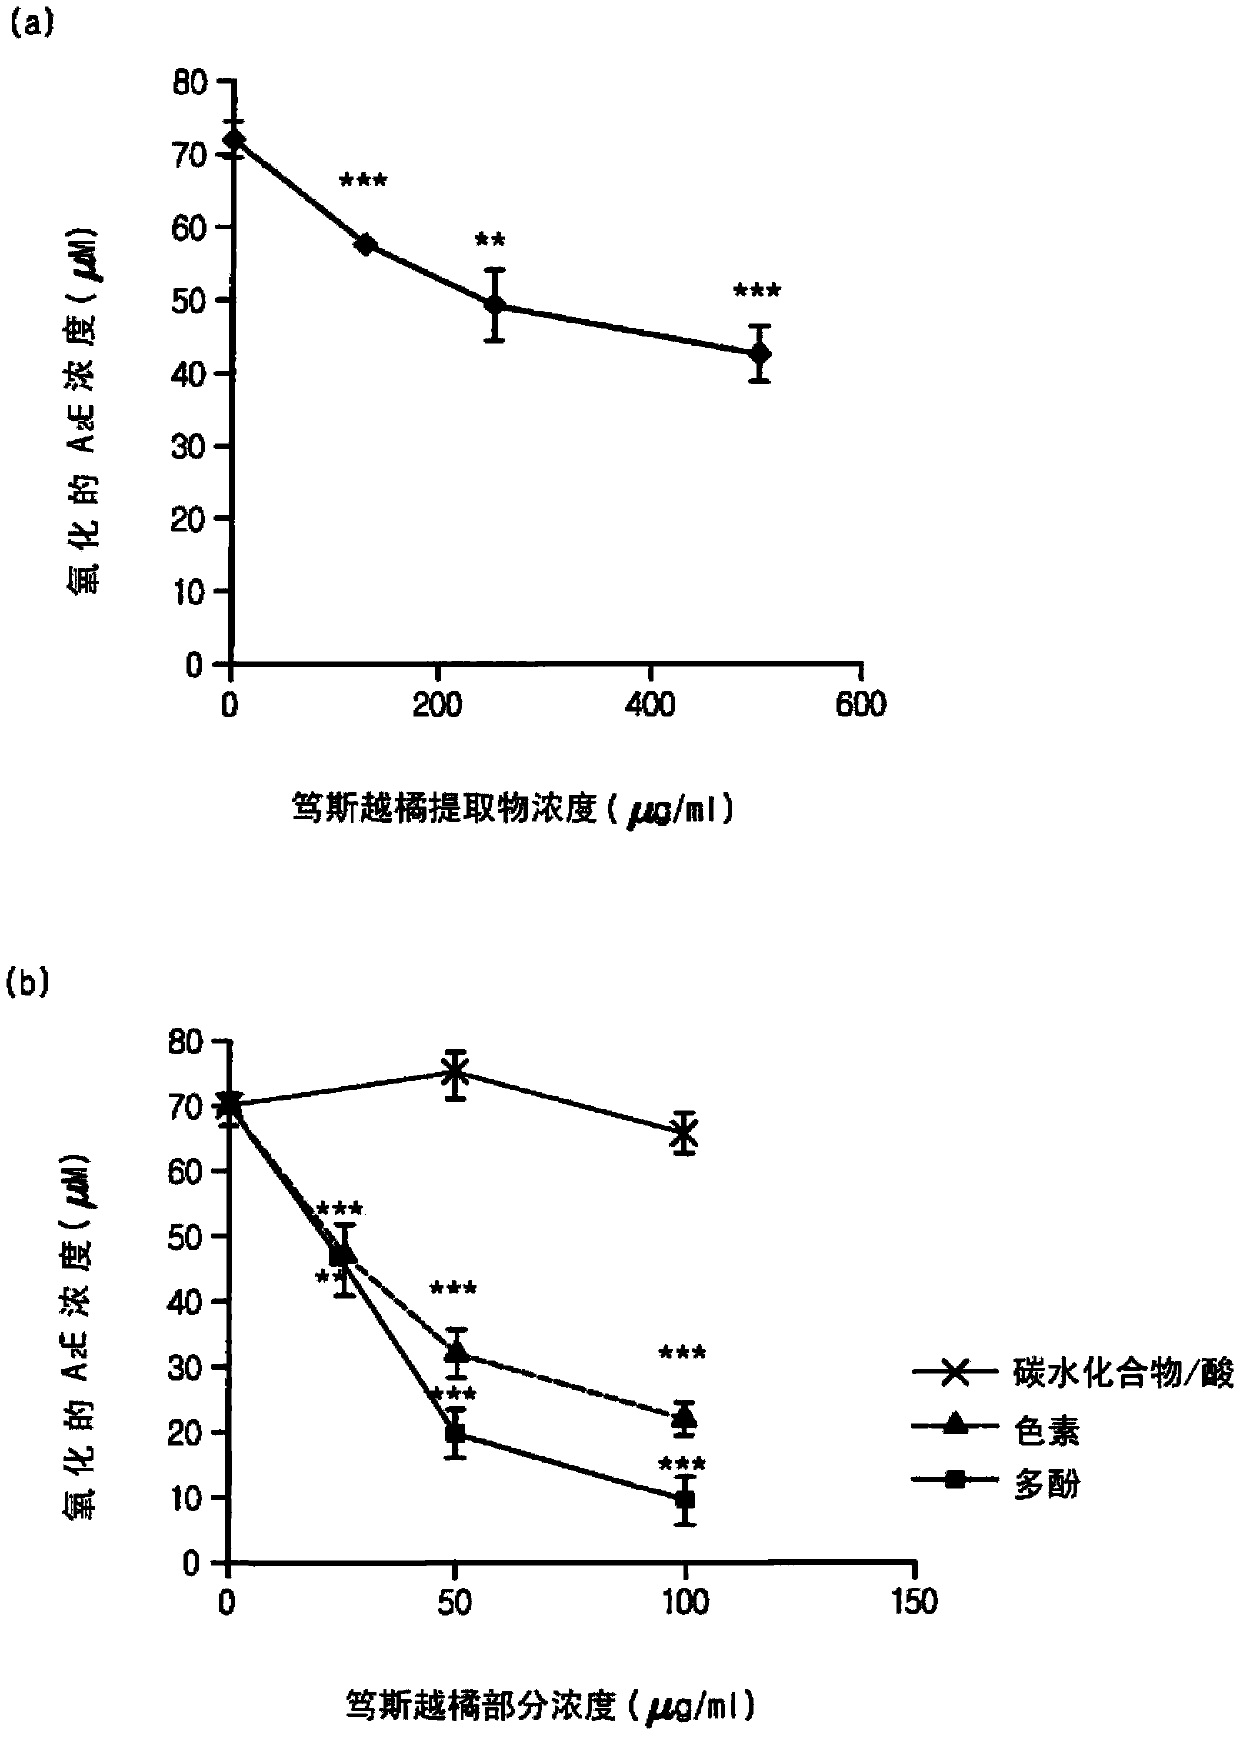 Composition for treating, preventing or relieving macular degeneration, containing vaccinium uliginosum extract or vaccinium uliginosum fractions as active ingredient